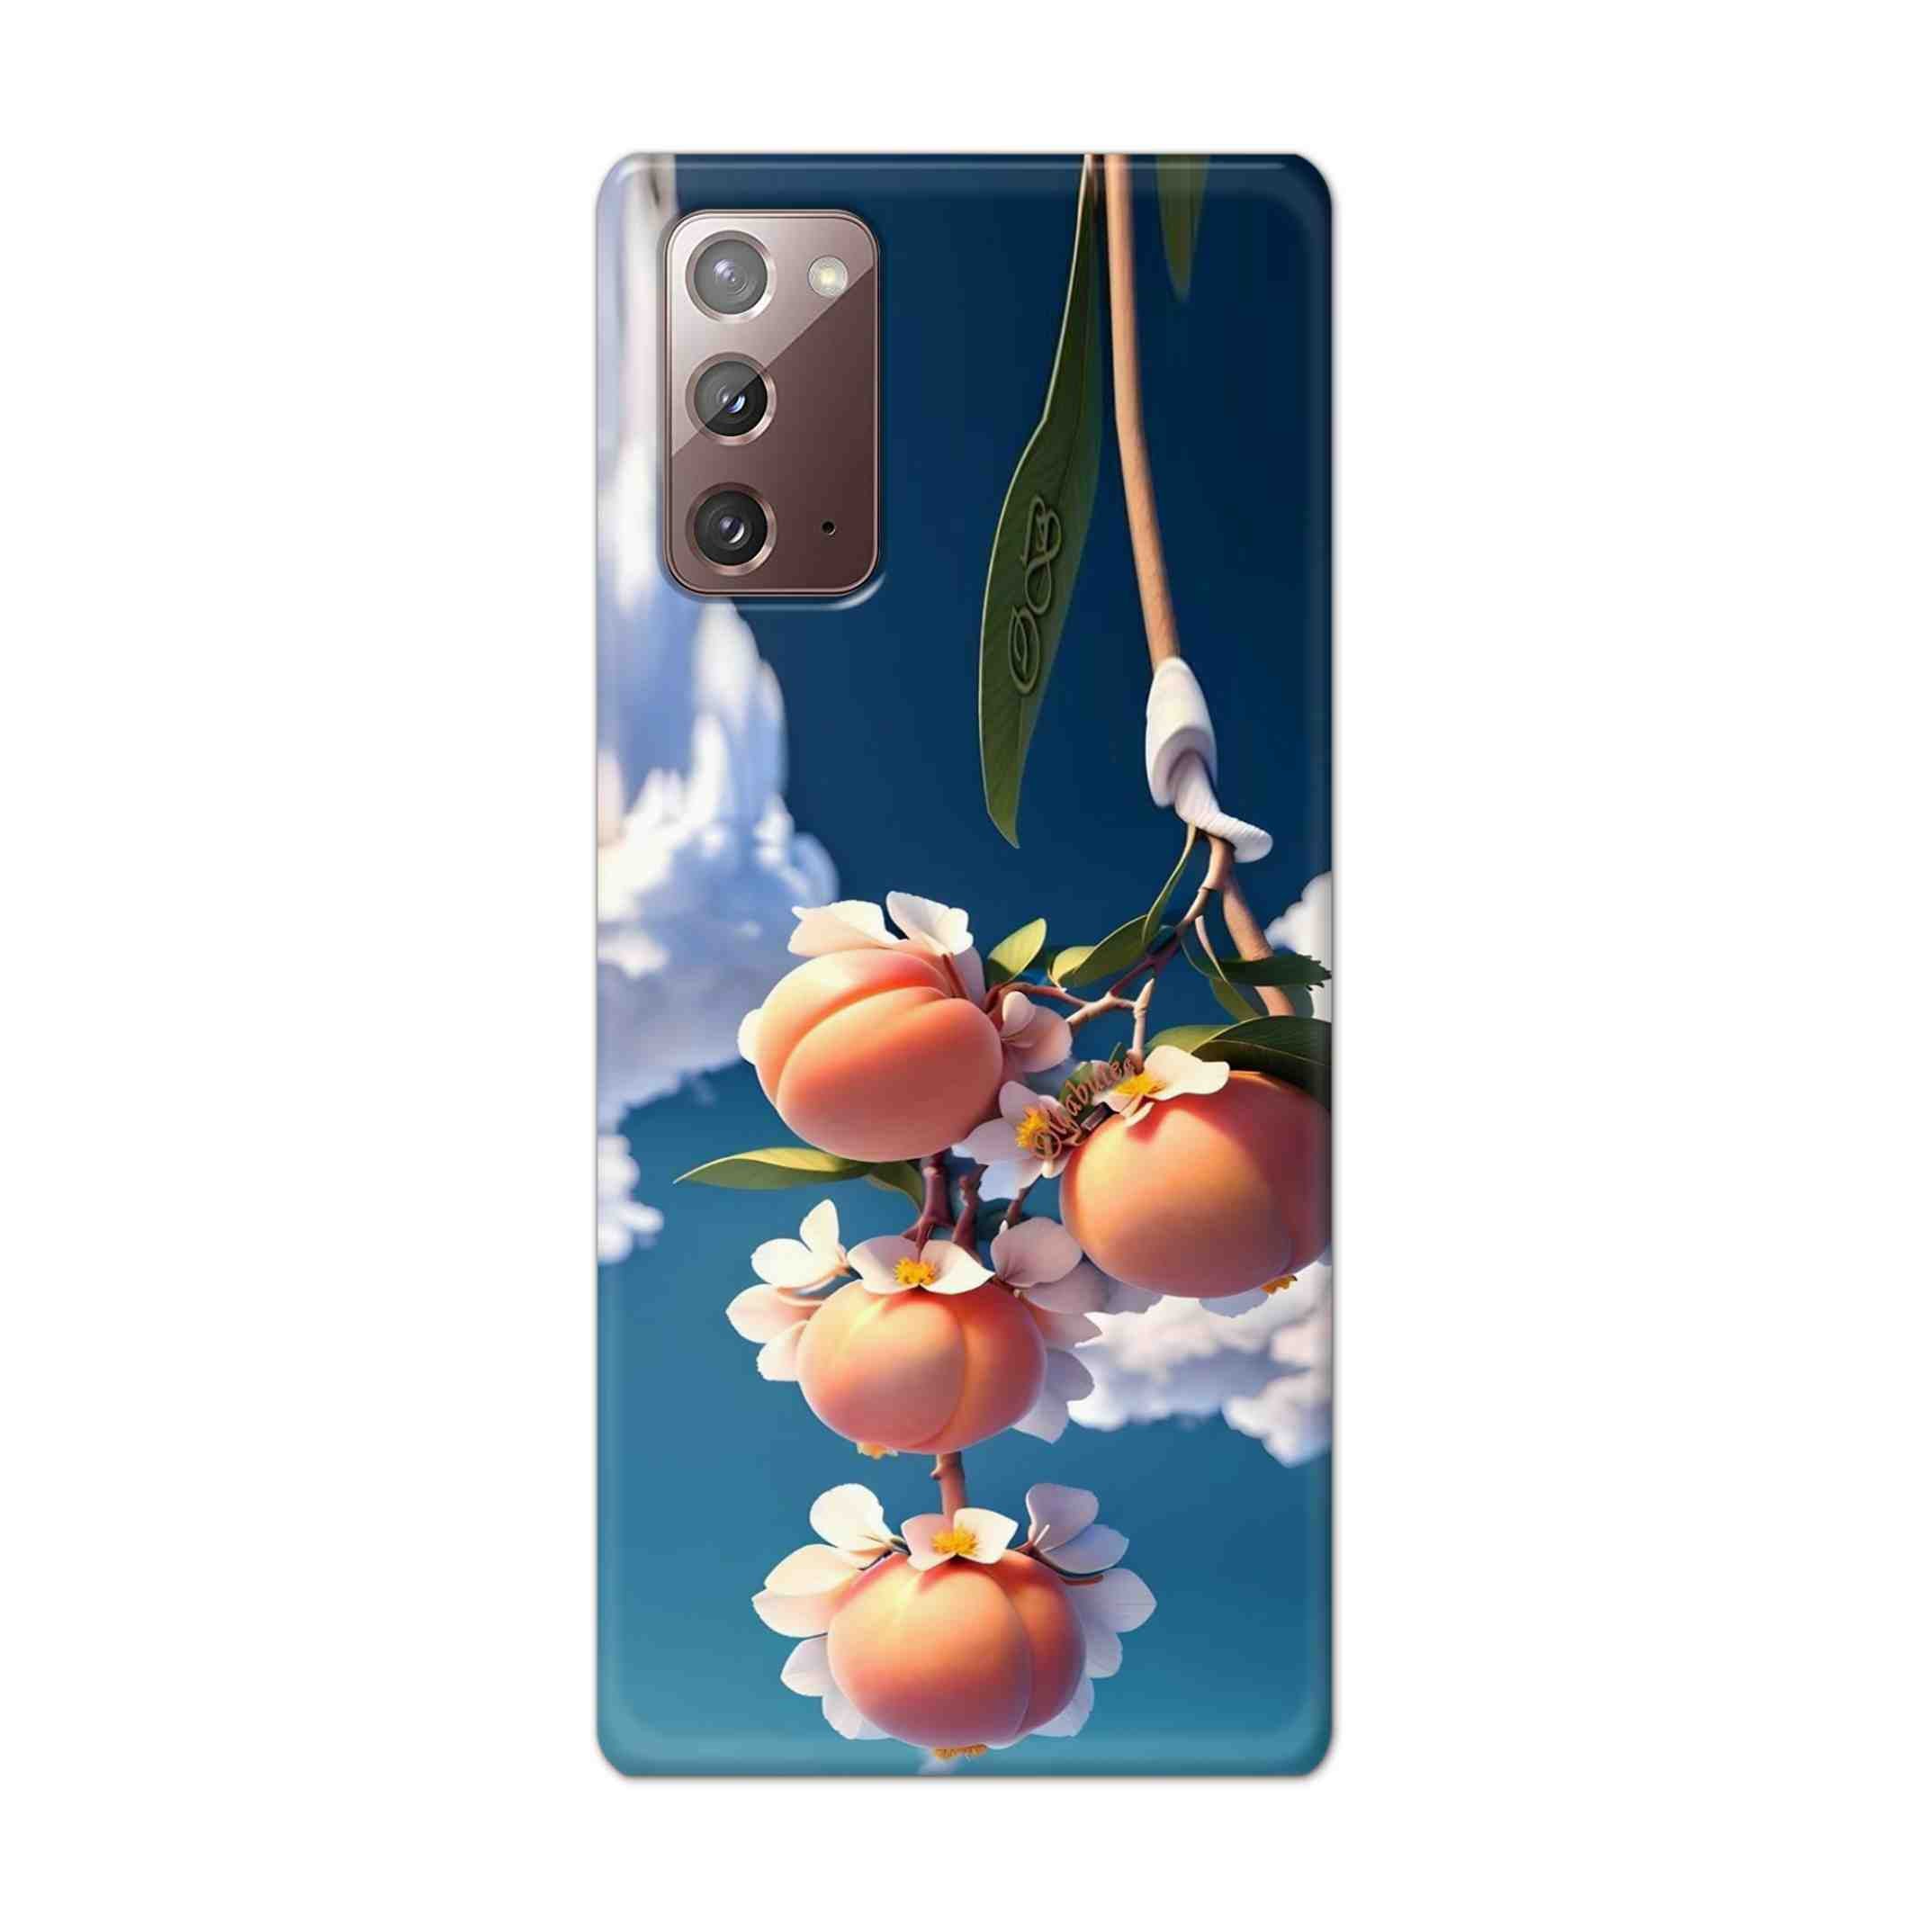 Buy Fruit Hard Back Mobile Phone Case Cover For Samsung Galaxy Note 20 Online